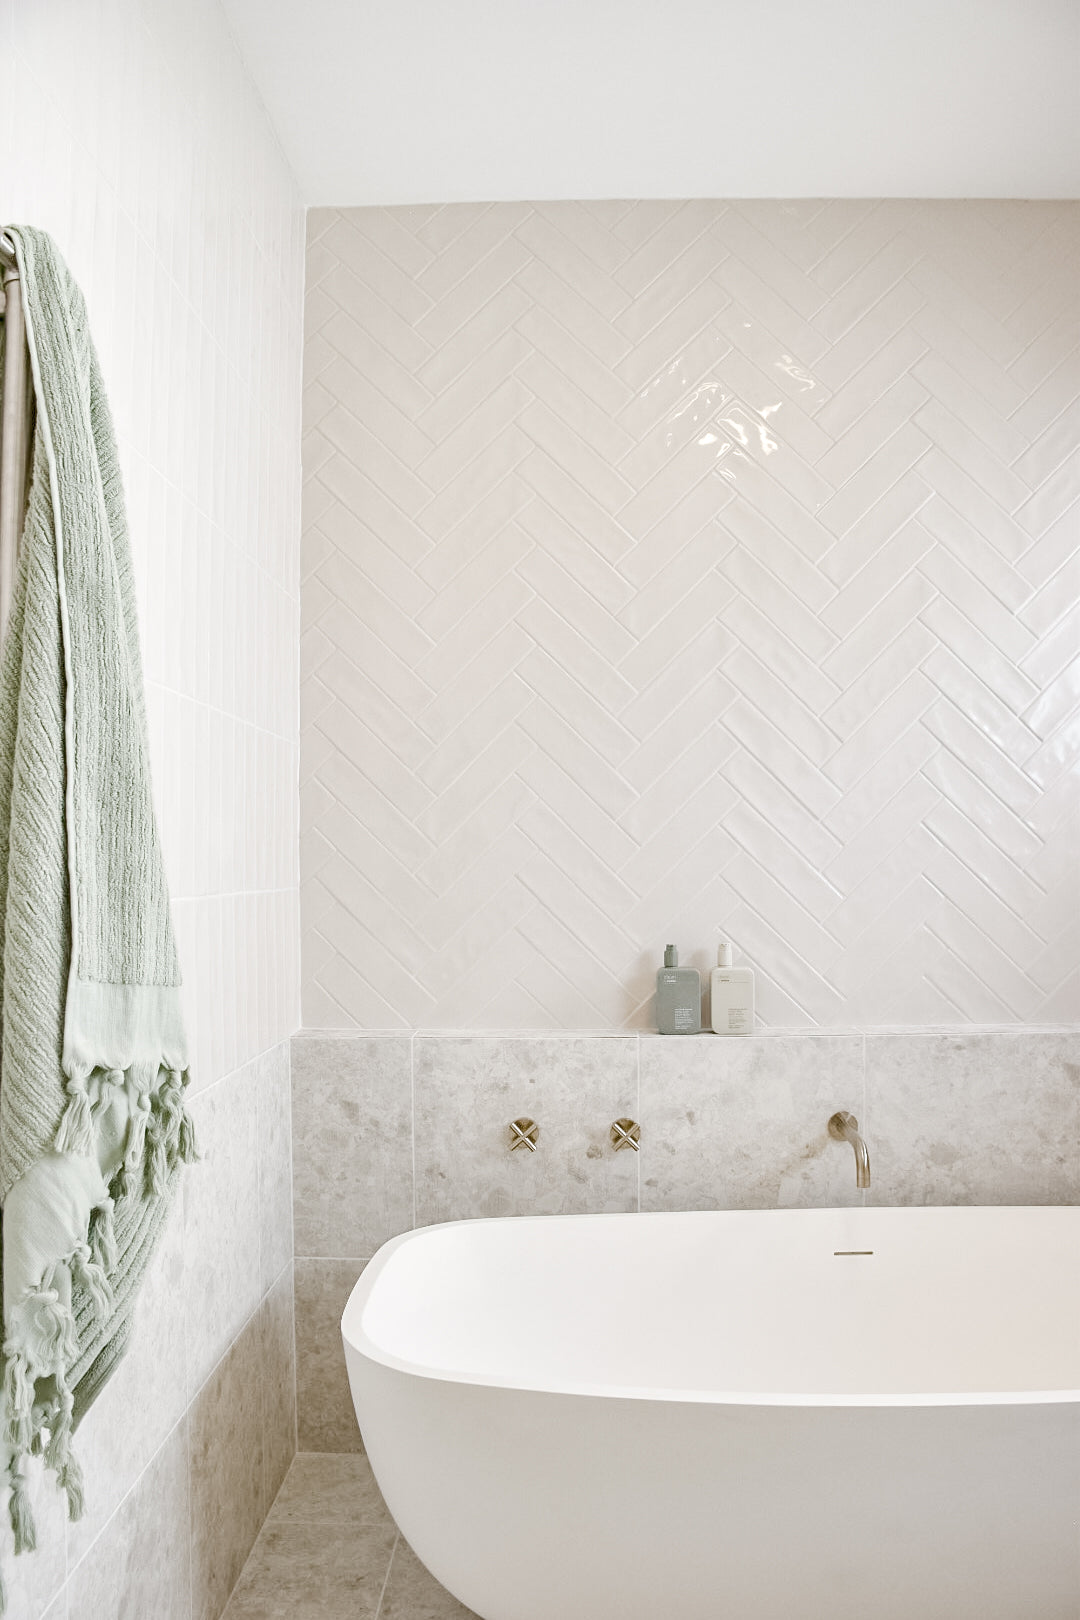 Nicole - Real Life Reno: complete renovation of an old bathroom with Tile Cloud